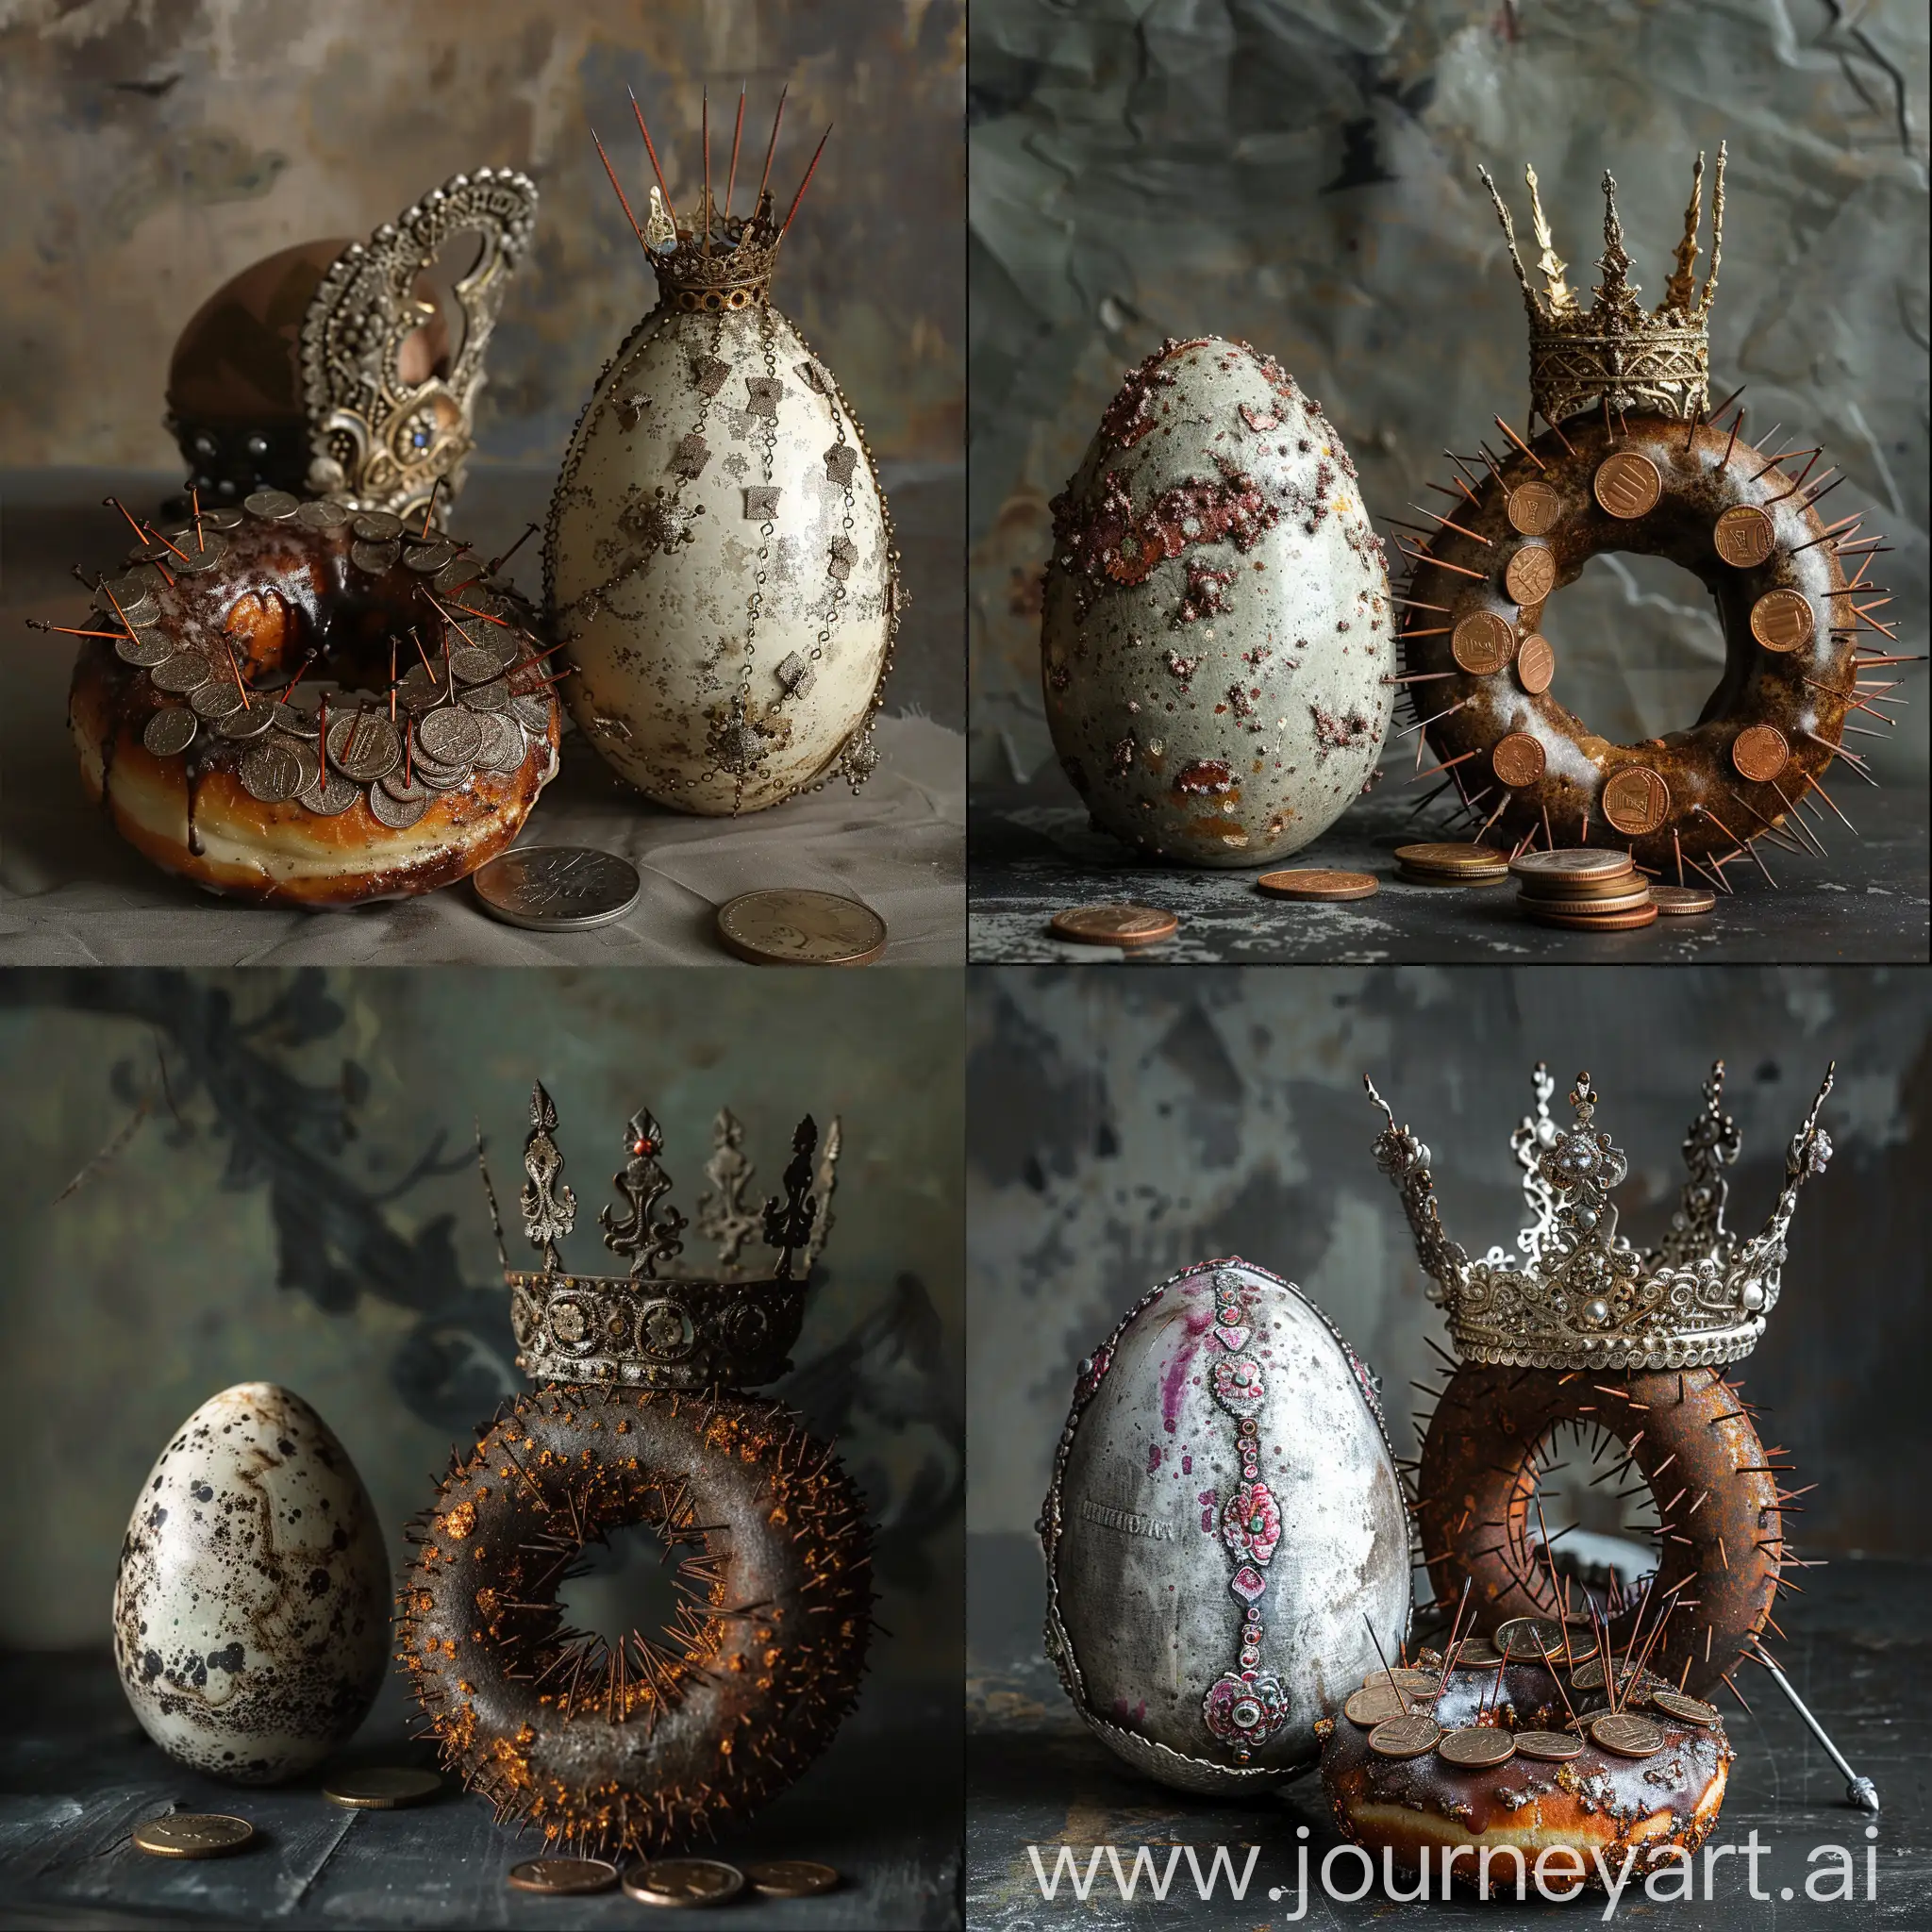 Dark-Fantasy-Scene-Rusty-Coin-and-Needle-Donut-with-Slavic-Egg-and-Crown